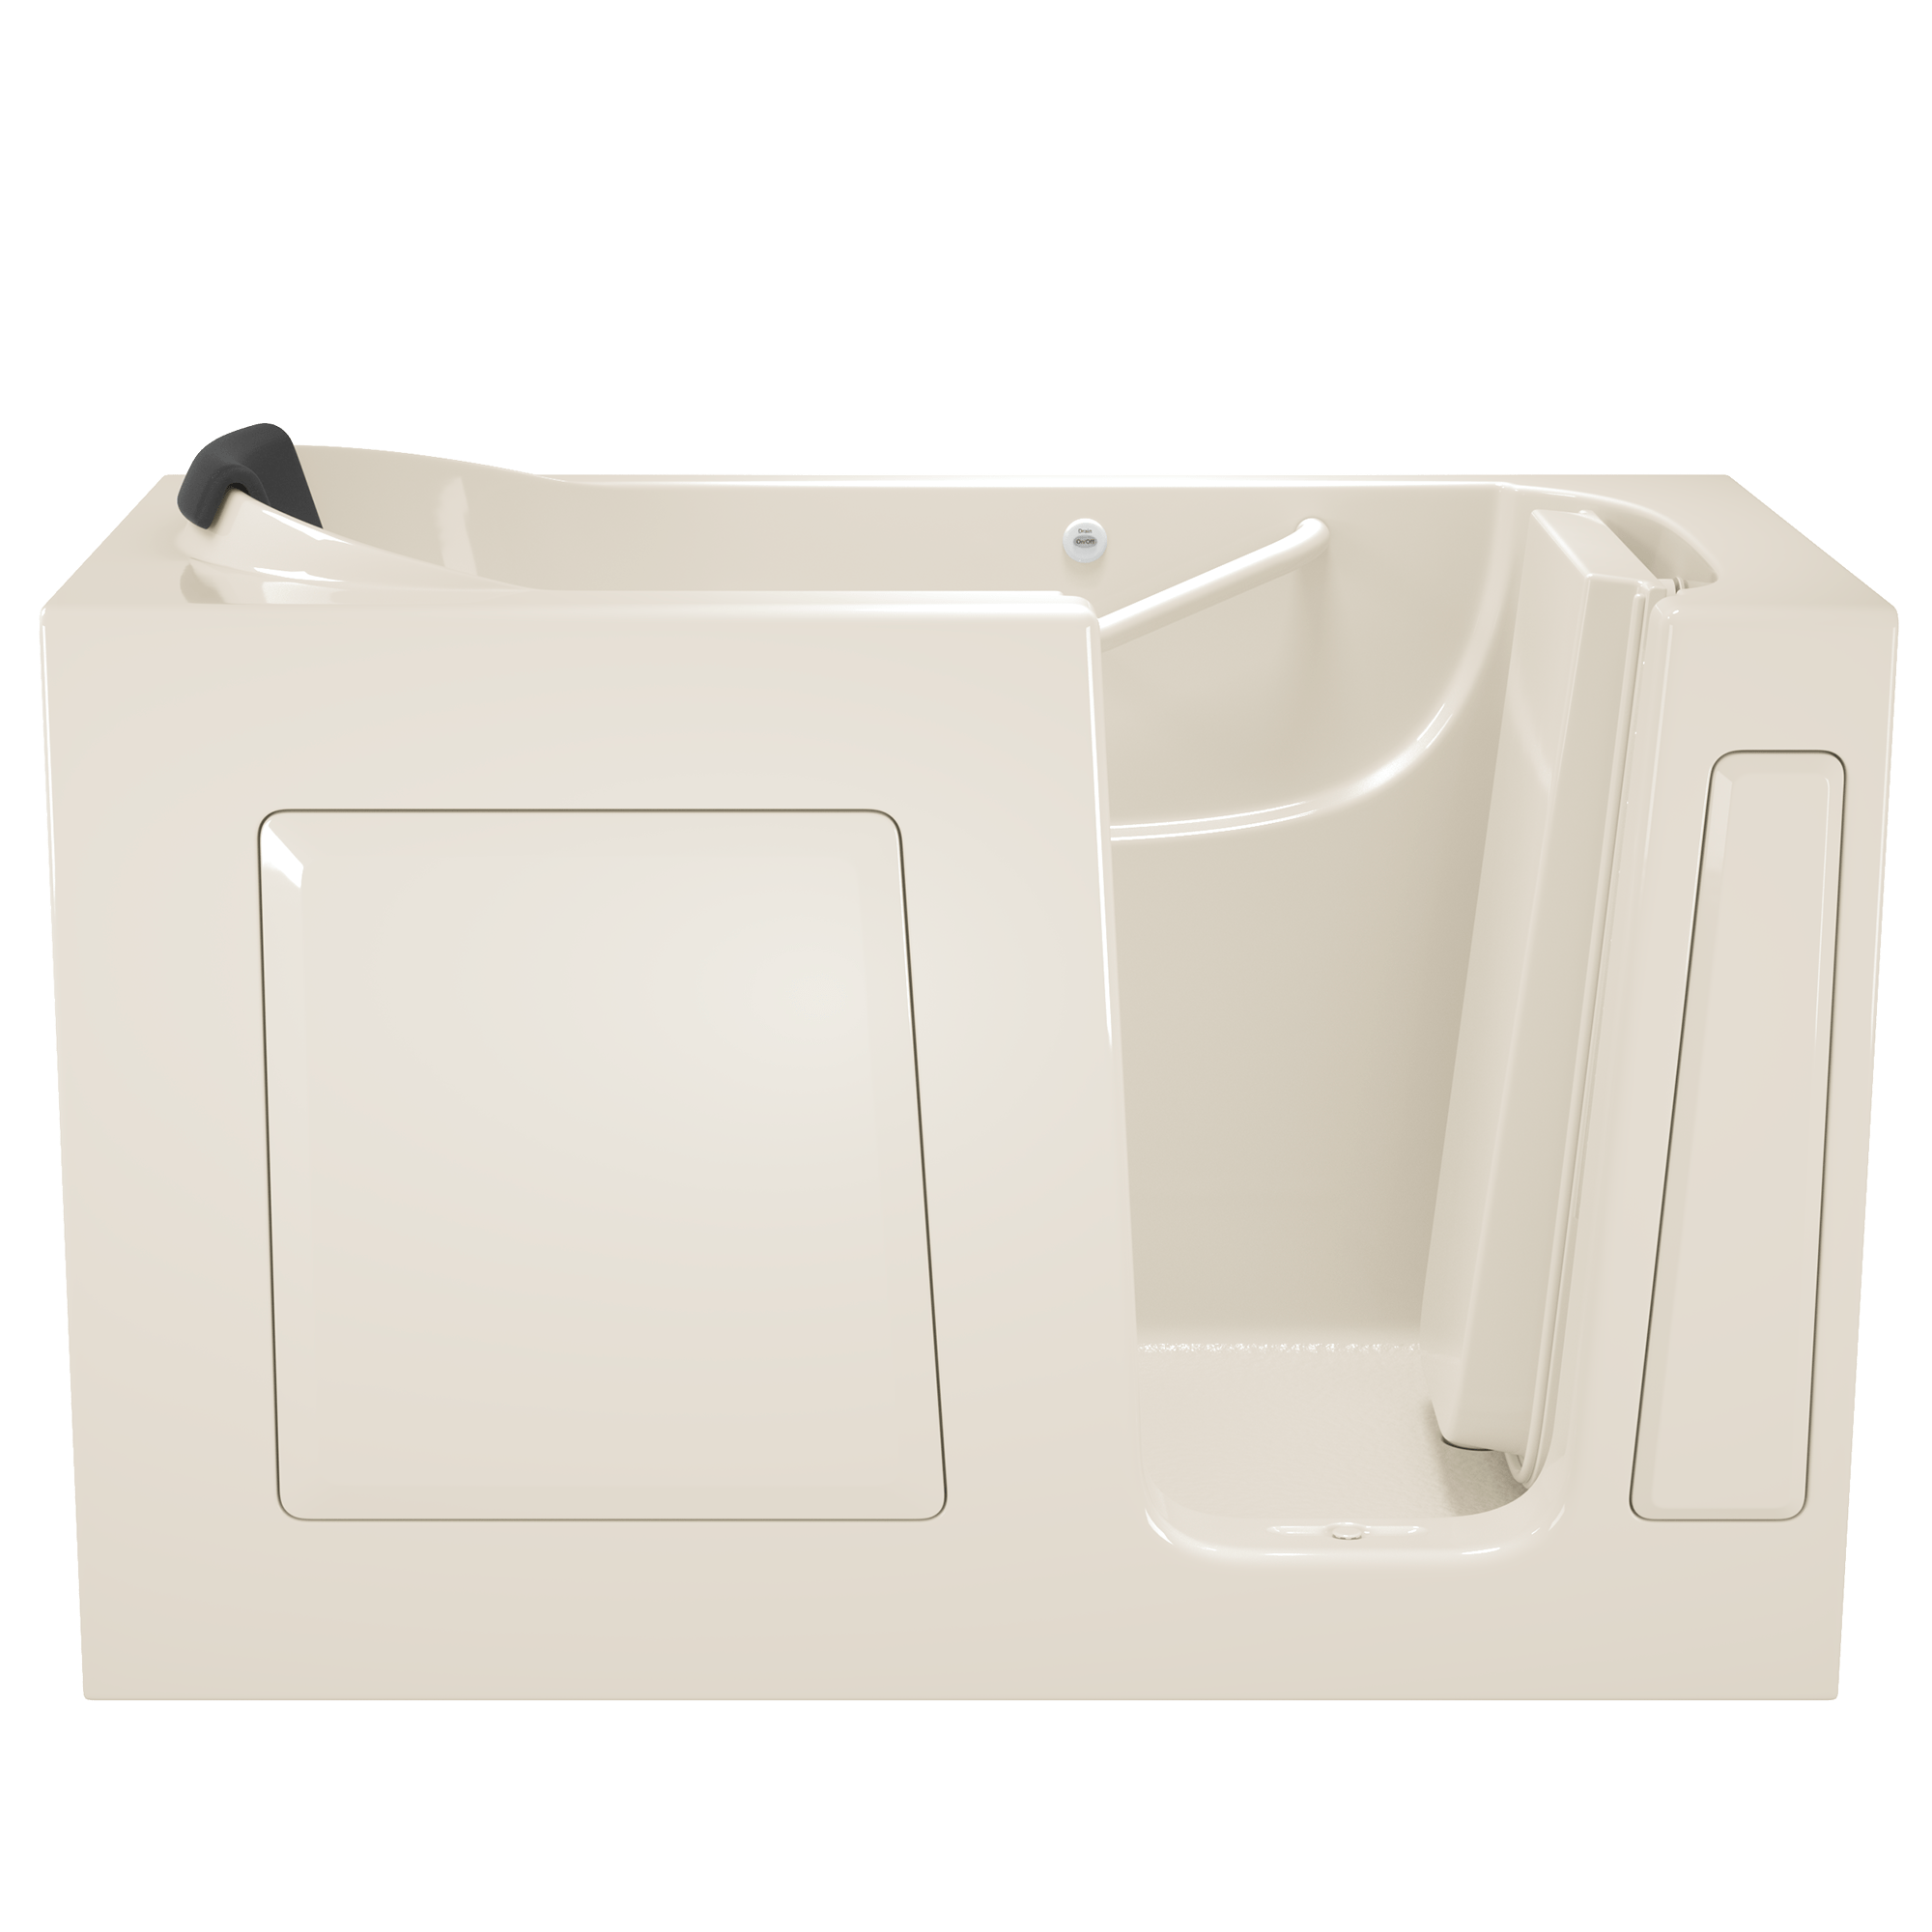 Gelcoat Premium Series 30 x 60 -Inch Walk-in Tub With Soaker System - Right-Hand Drain